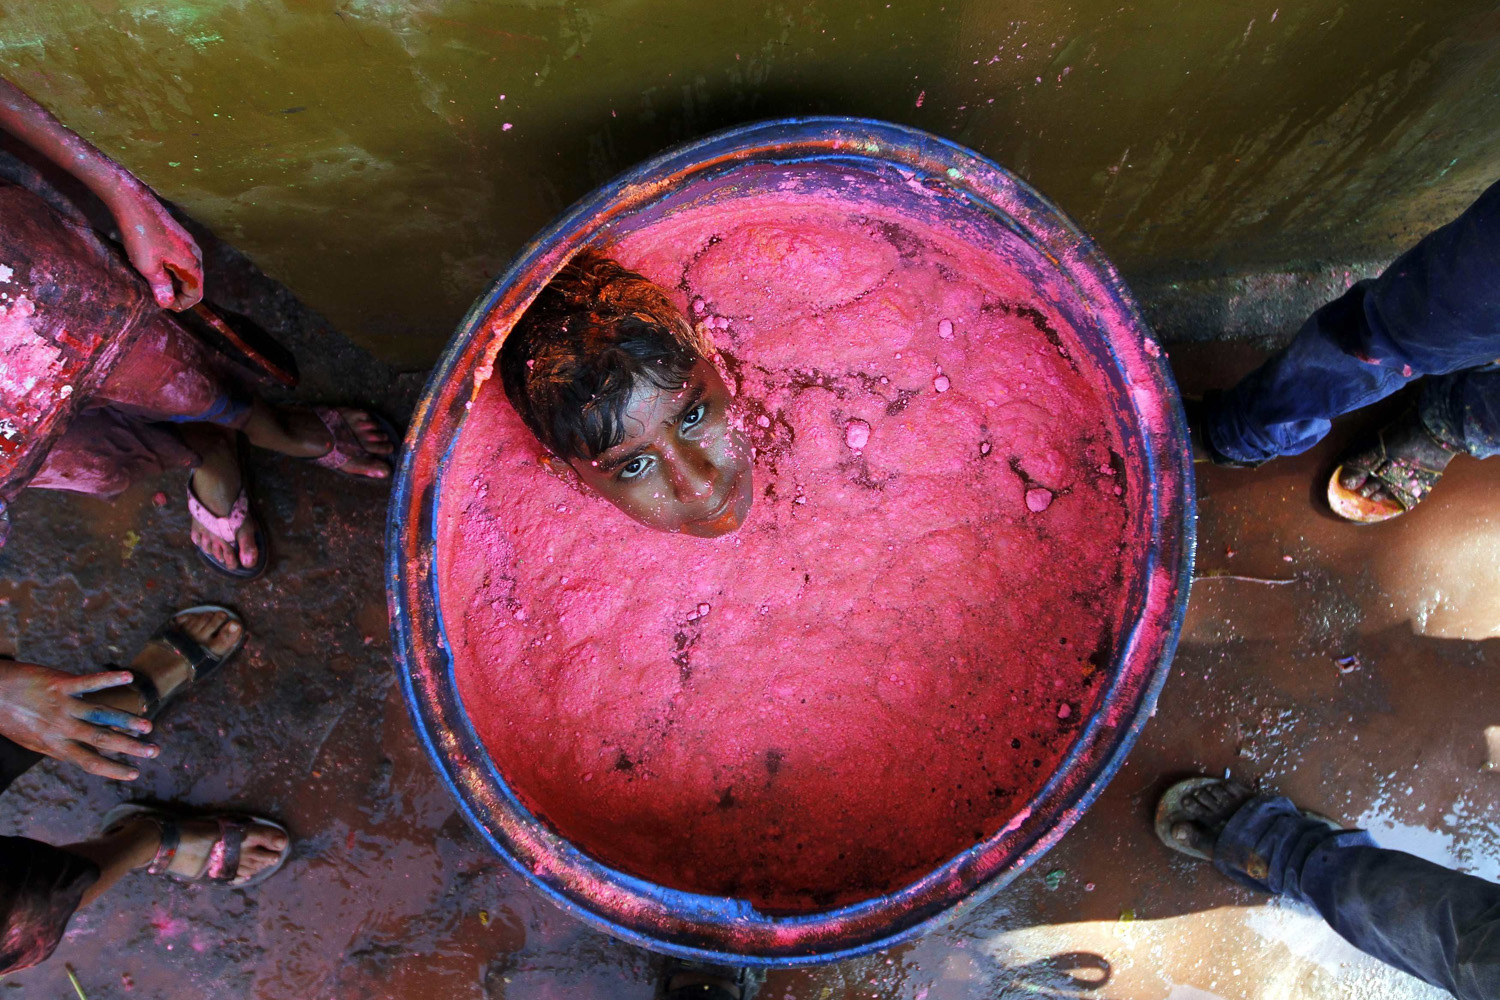 Mar. 16, 2014. A boy sits in a plastic container filled with colored water during Holi celebrations in the southern Indian city of Chennai. Holi, also known as the Festival of Colors, heralds the beginning of spring and is celebrated all over India.